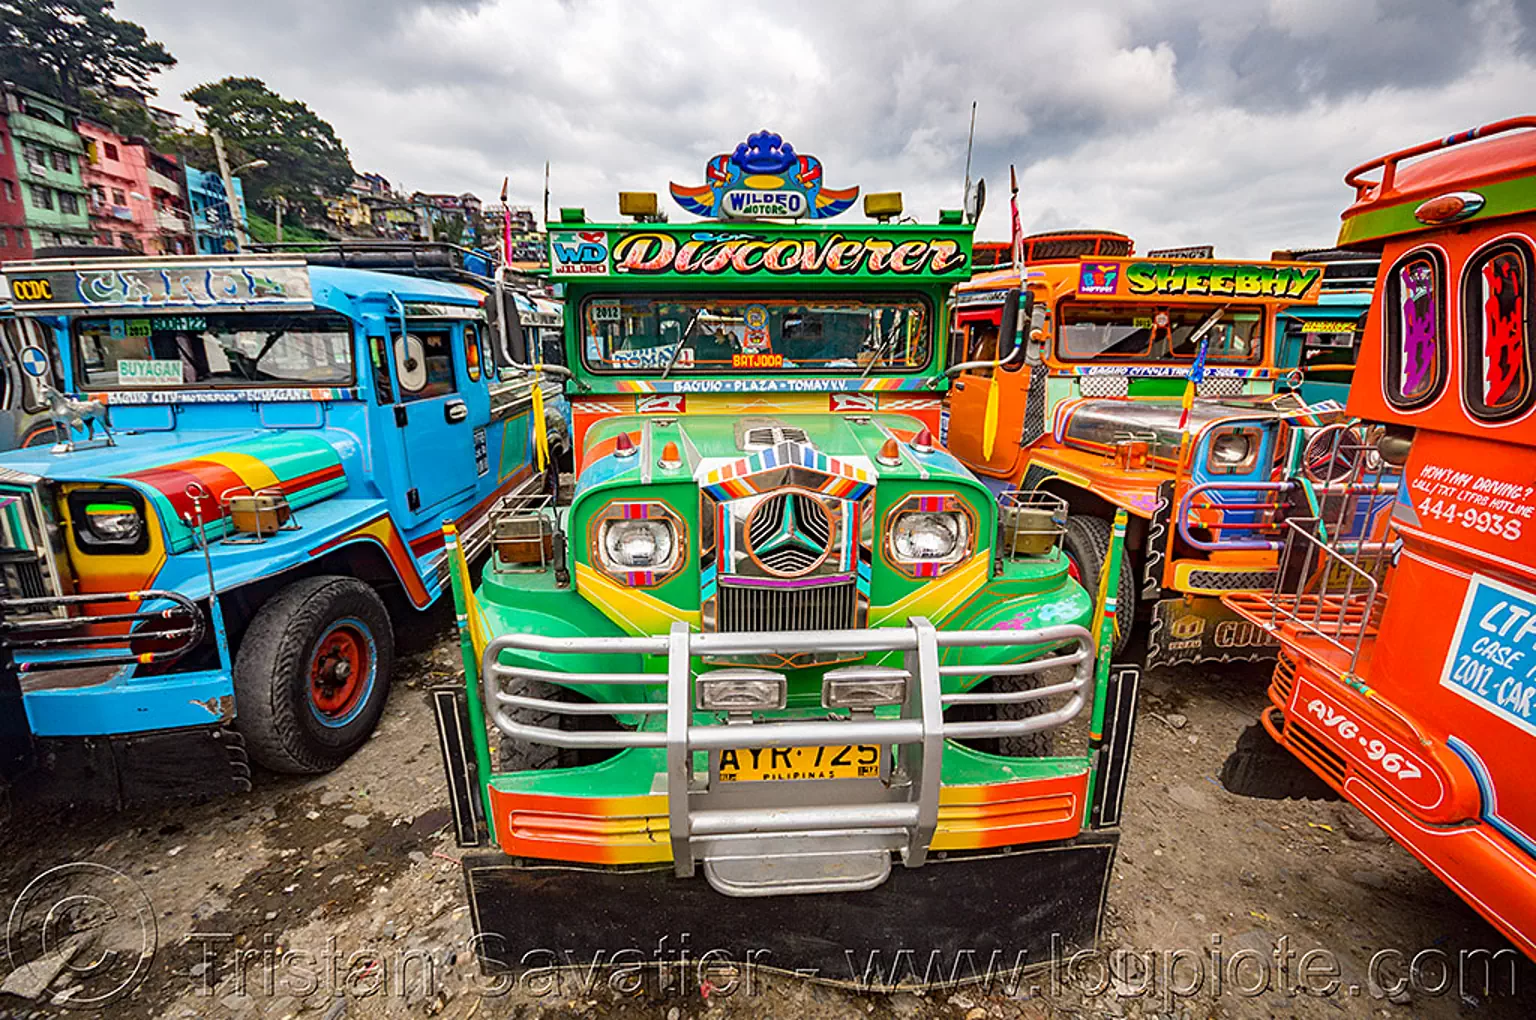 green jeepney on parking lot (philippines), baguio, colorful, decorated, front grill, jeepney, painted, philippines, truck